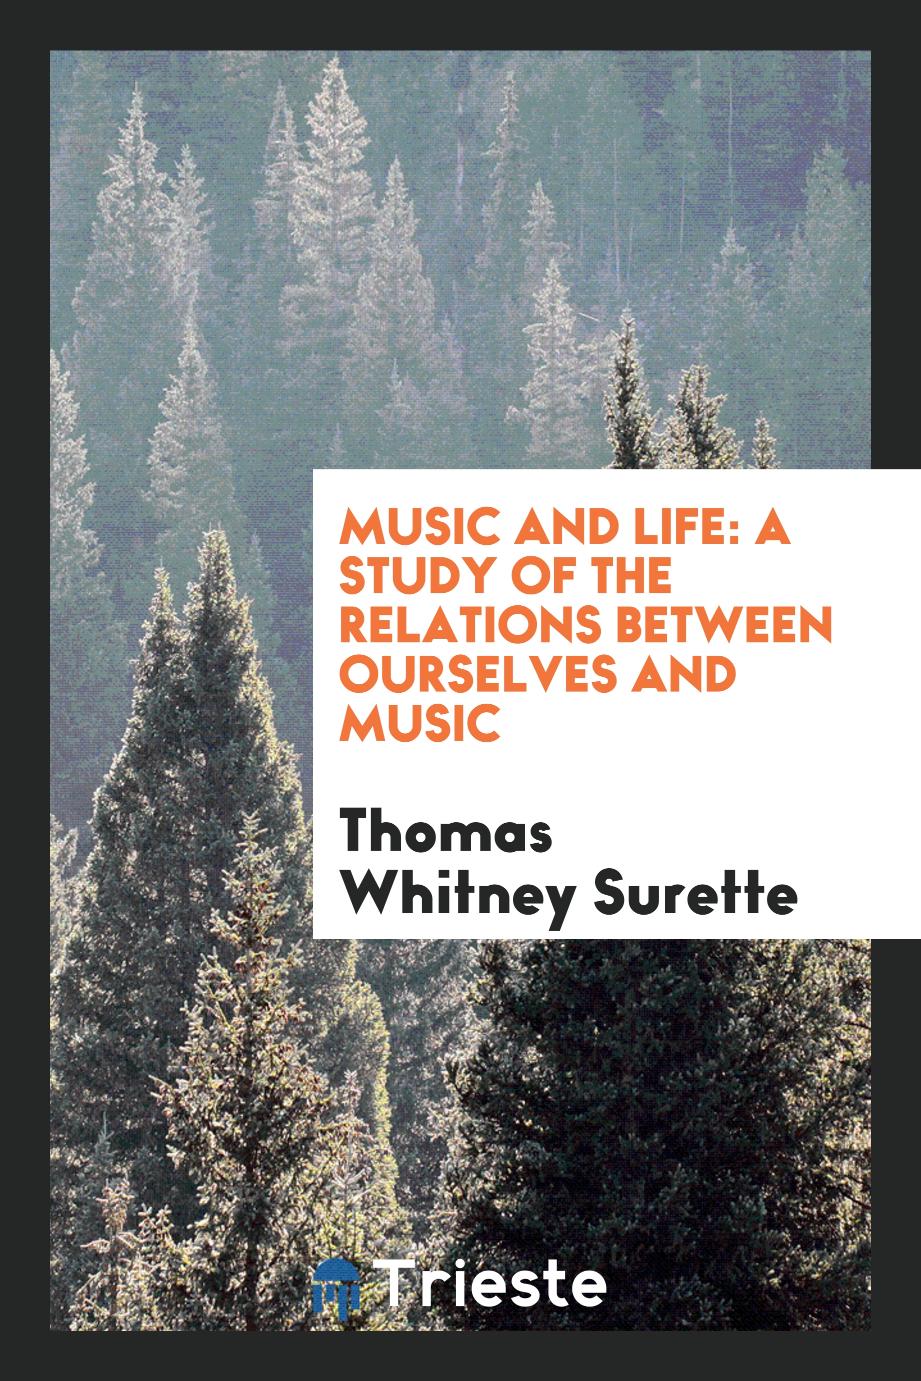 Music and Life: A Study of the Relations Between Ourselves and Music